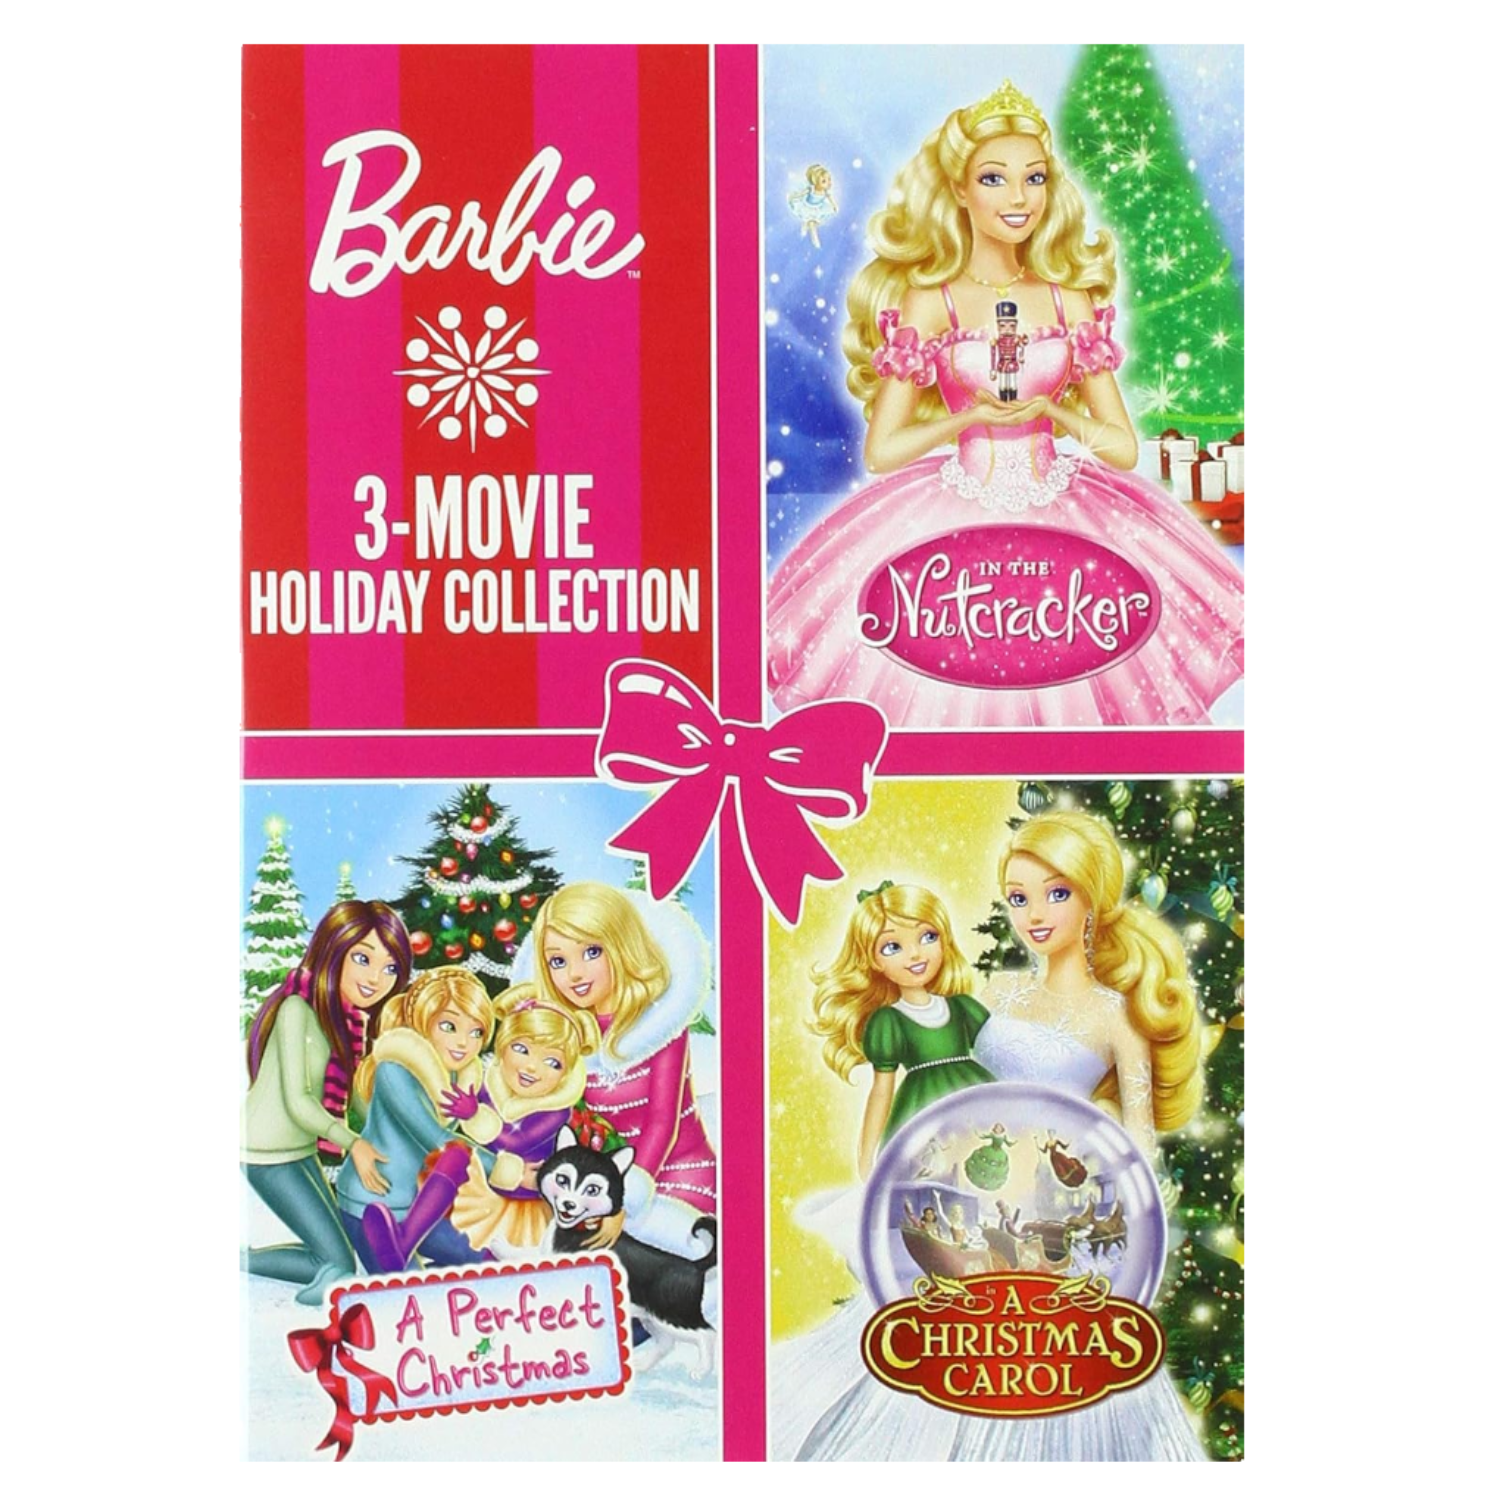 Barbie 3-Movie Holiday Collection